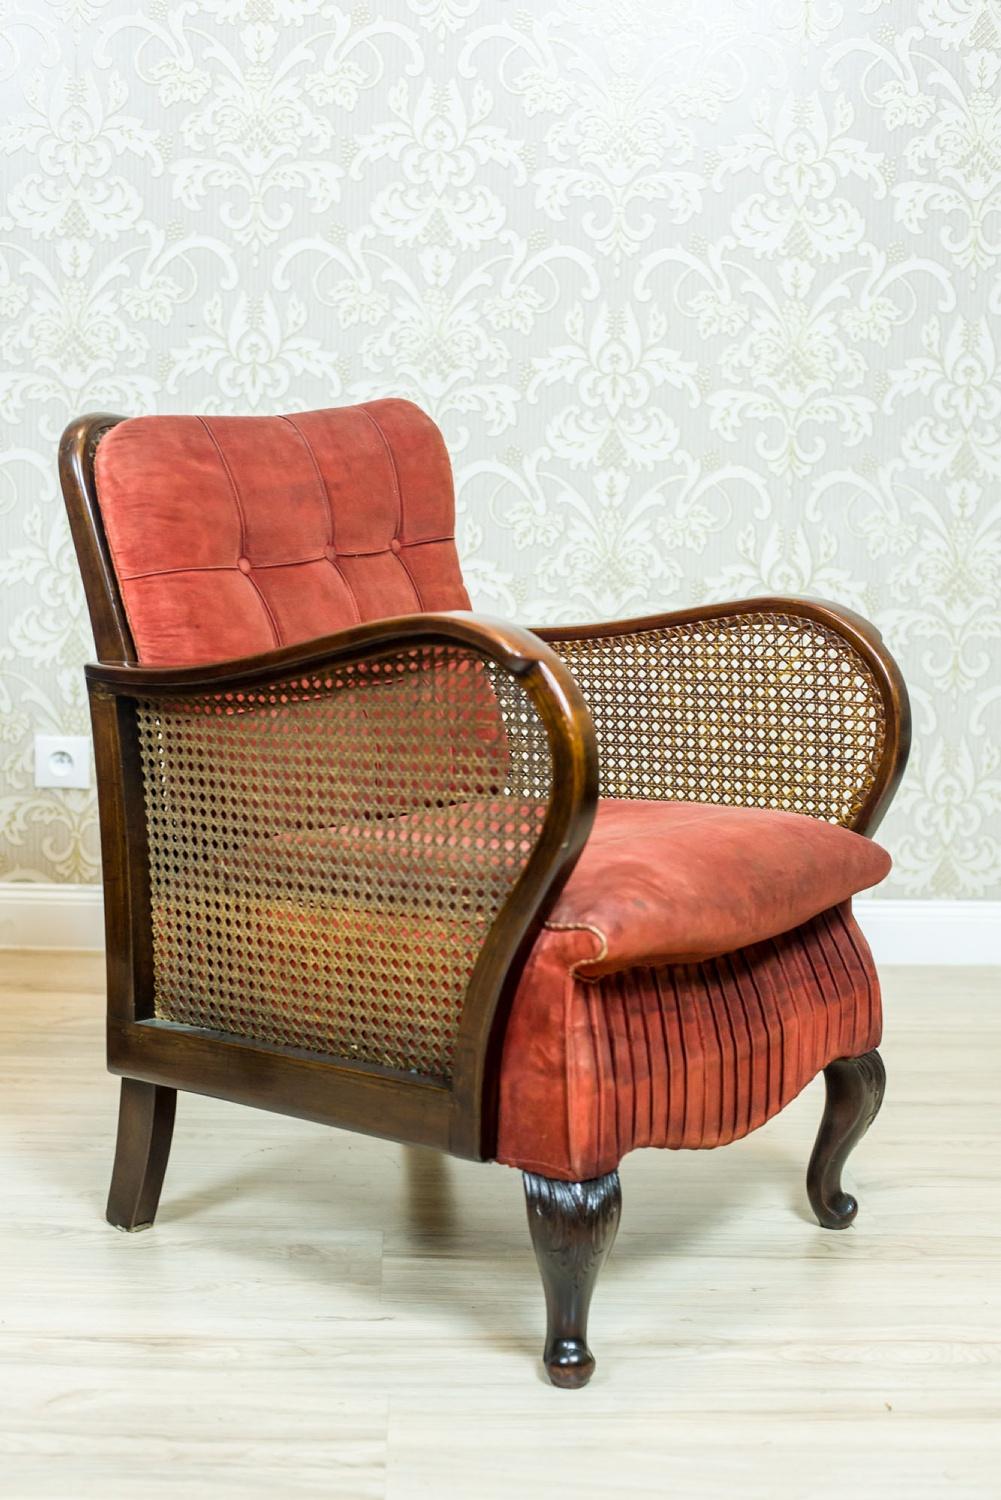 Two Thonet Armchairs from the 1920s (Österreichisch)